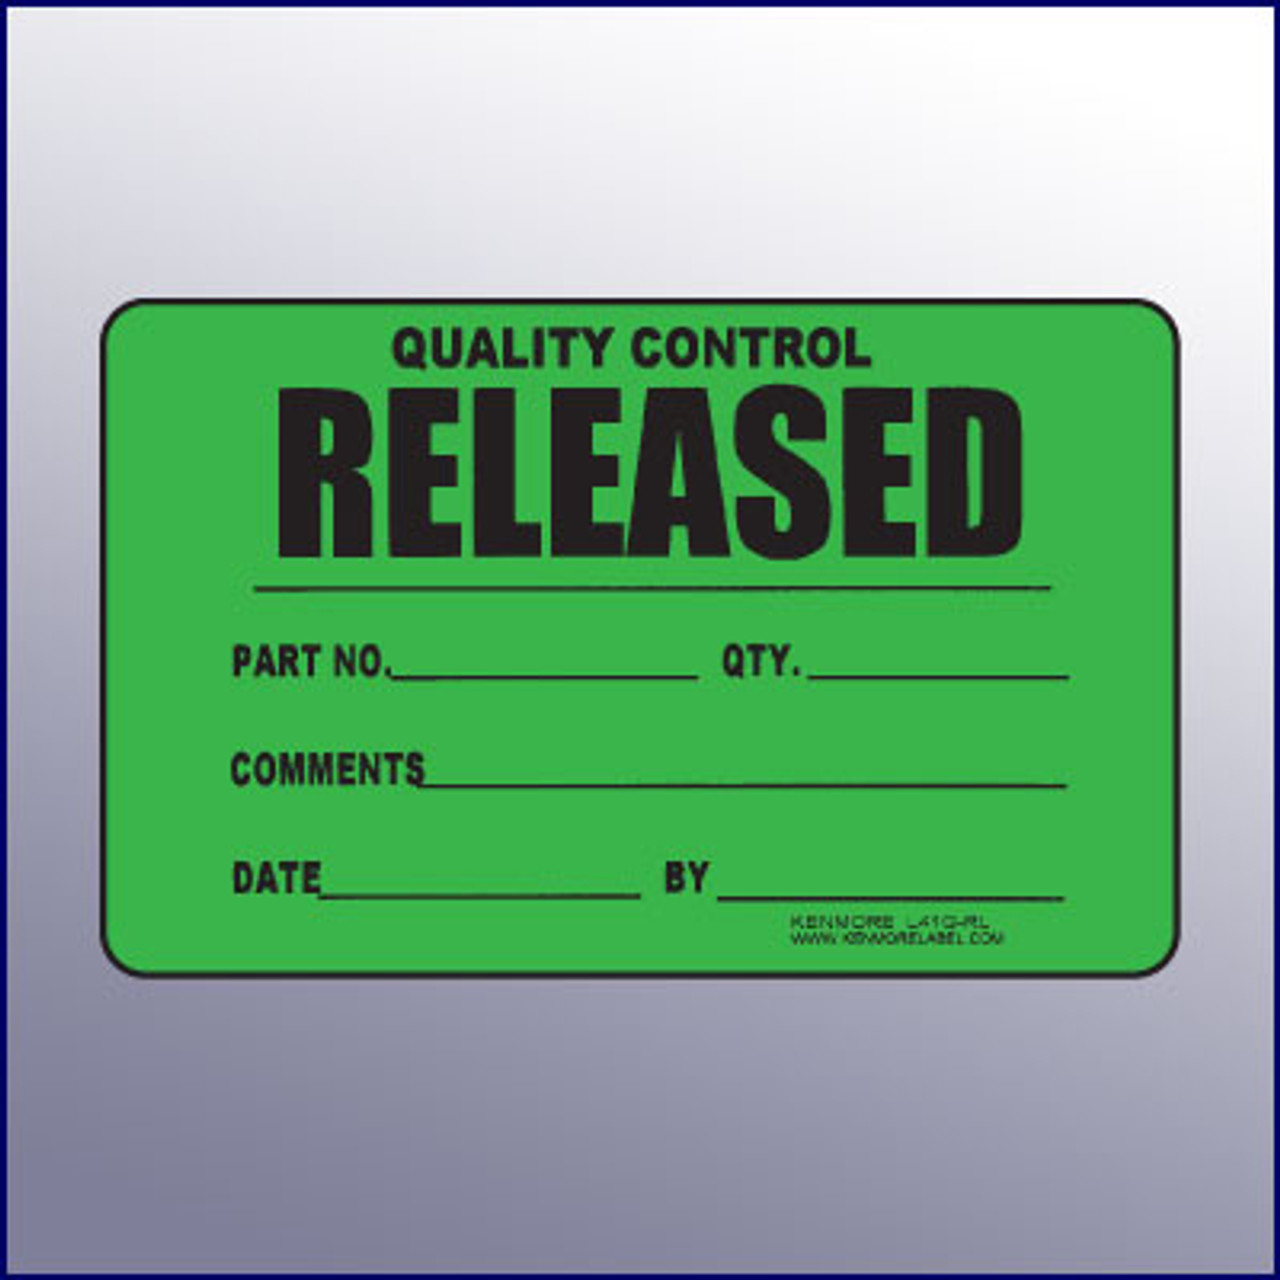 New Lot - Do Not Use Quality Control Labels